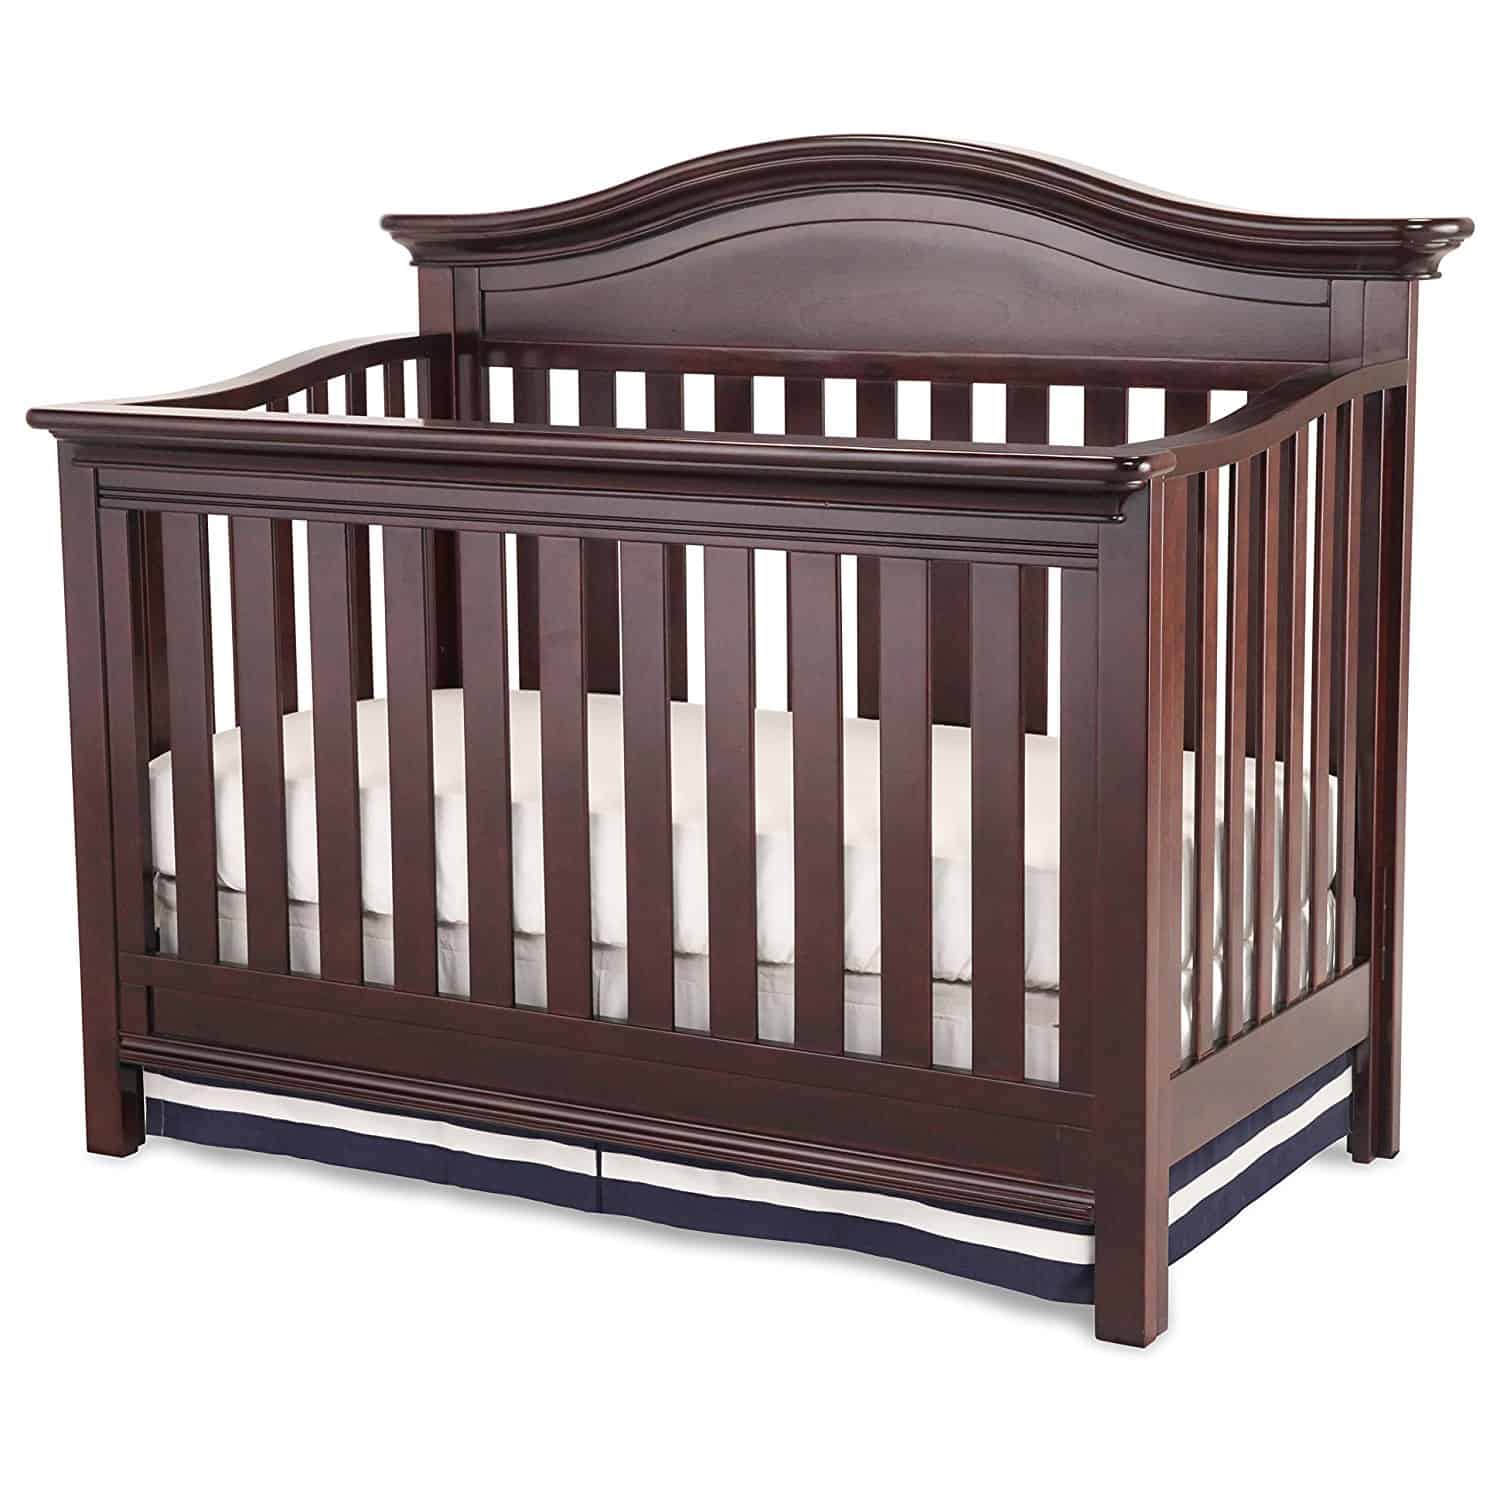 simmons changing table